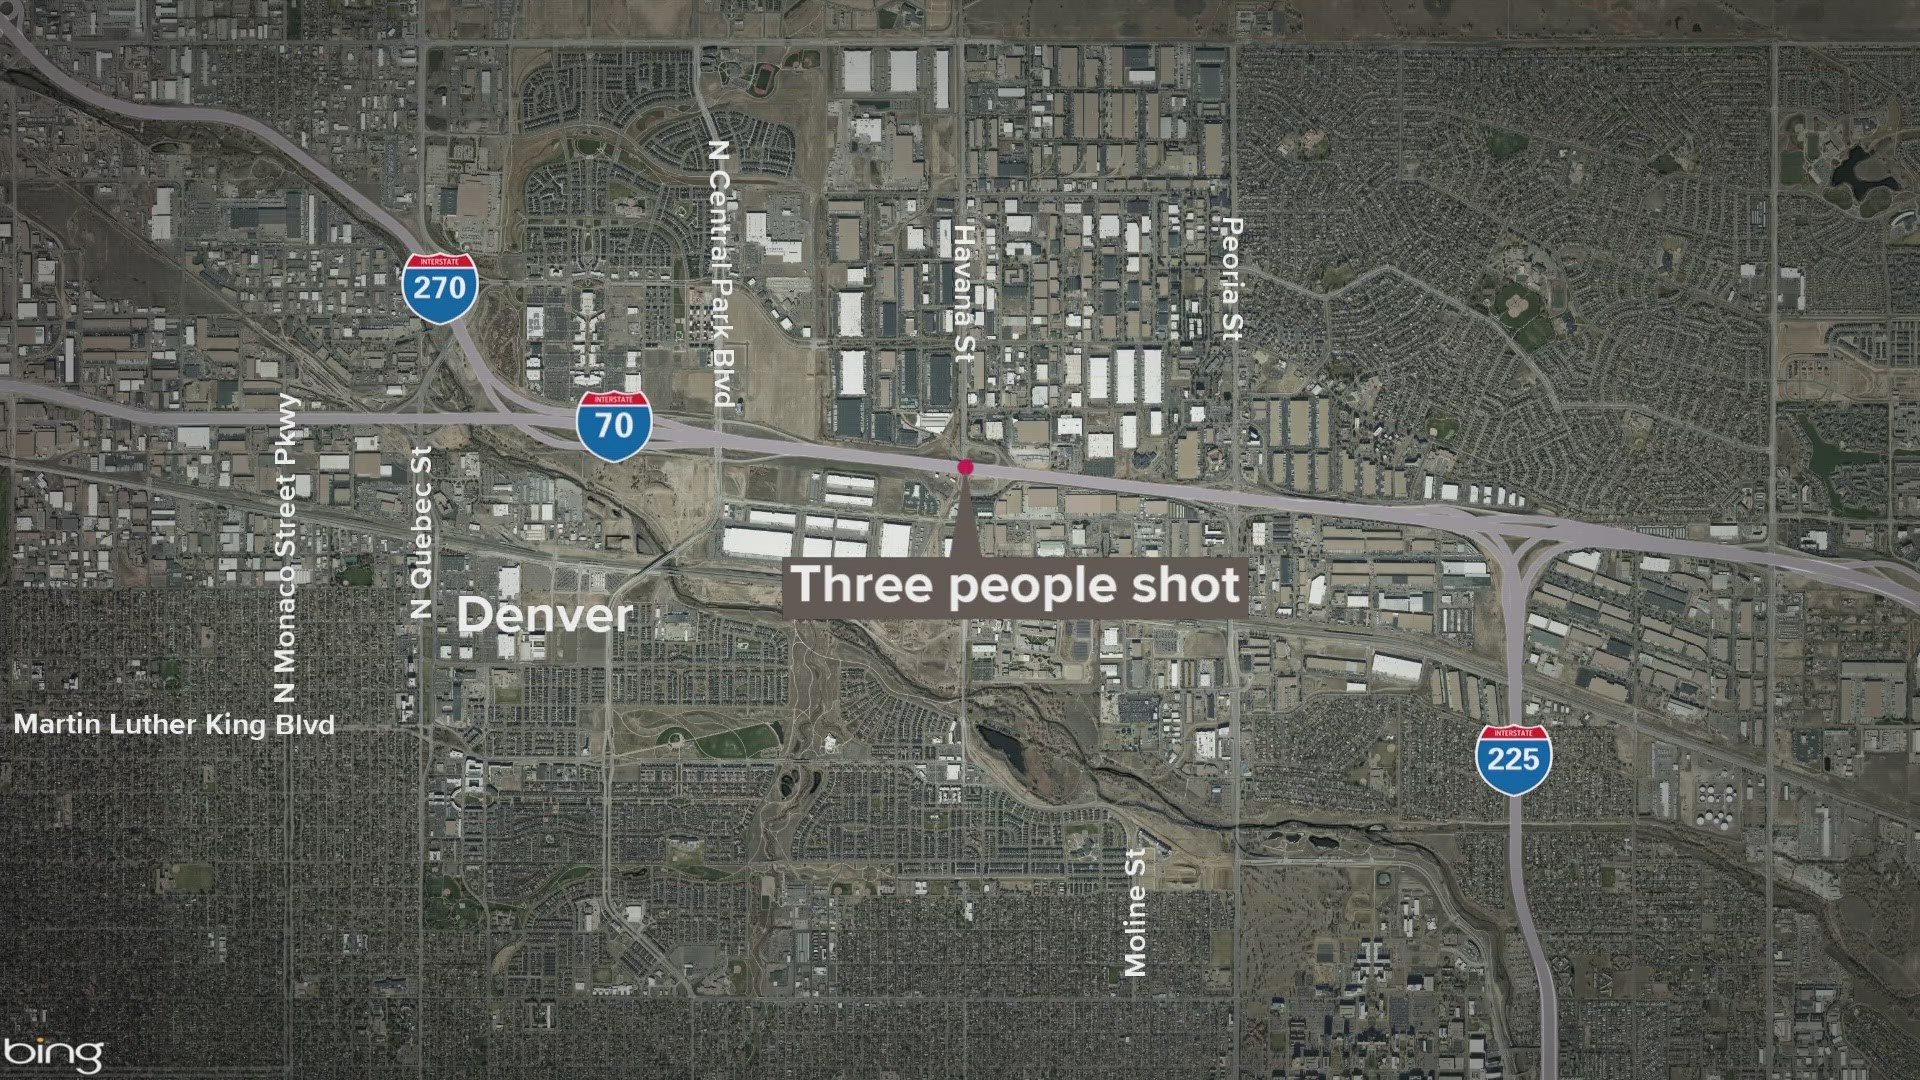 Denver Police are investigating a shooting on I-70 that left three people injured.